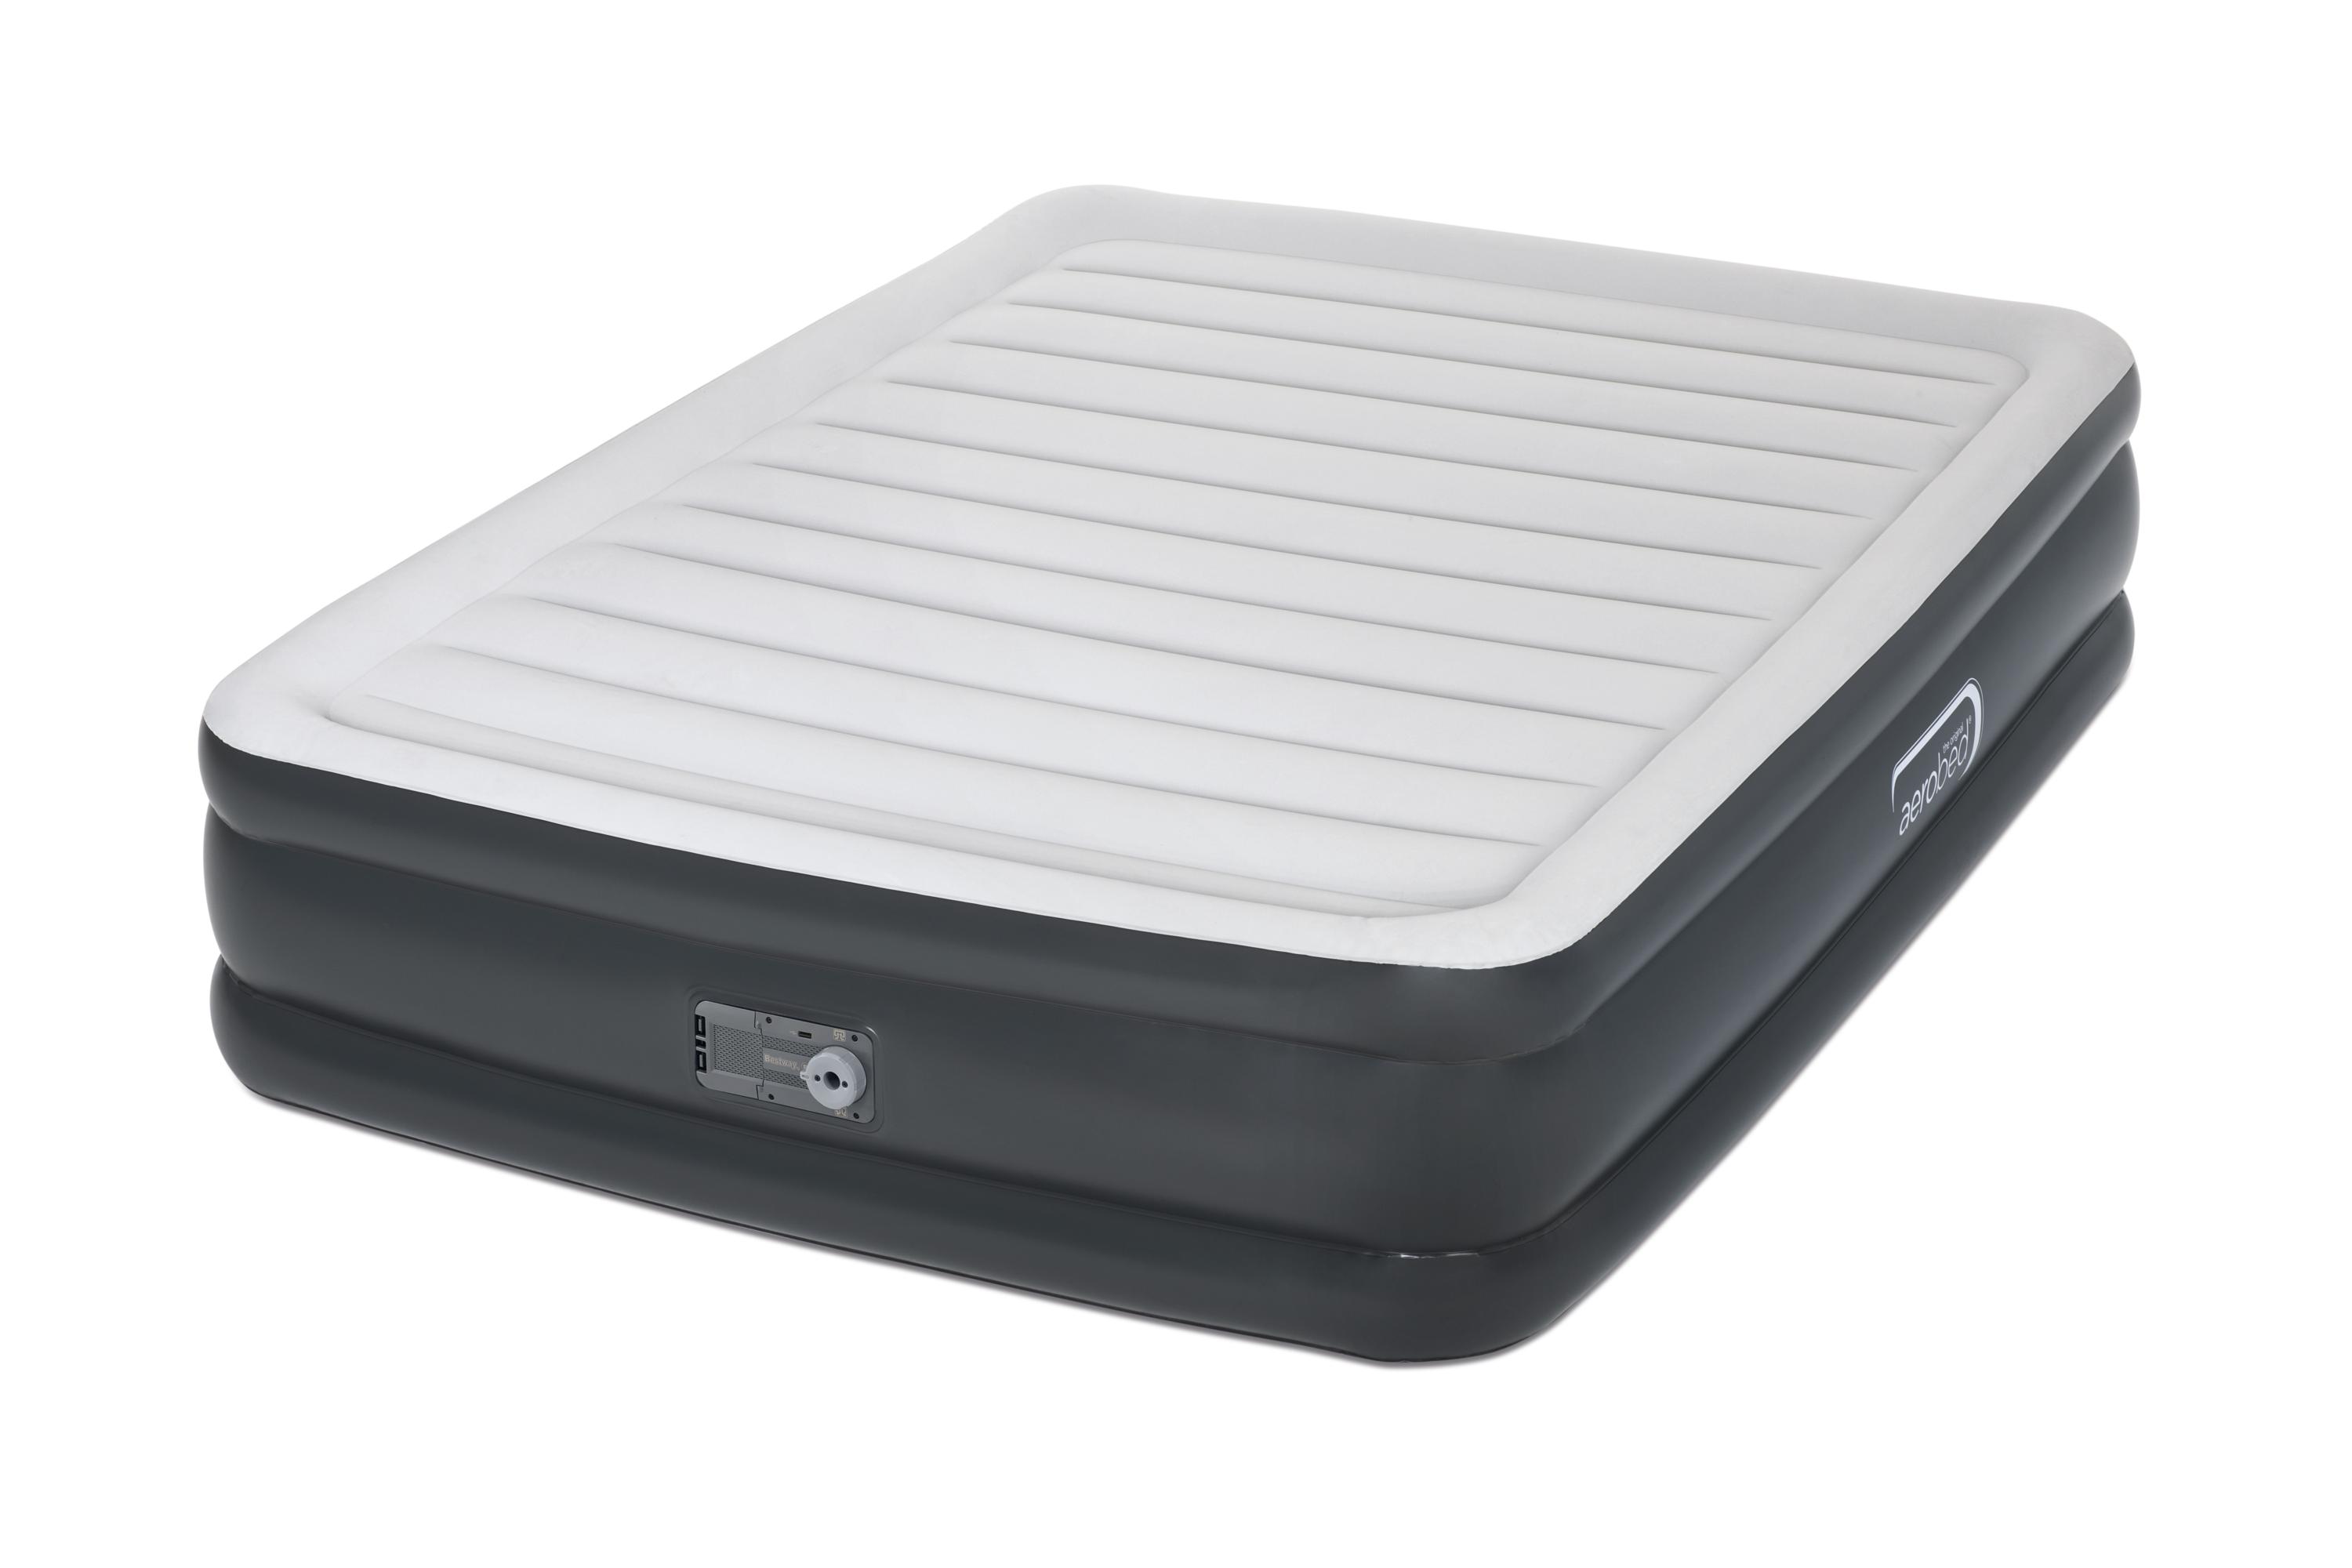 Aerobed 17" Queen Air Mattress with Built-in Pump - image 1 of 9